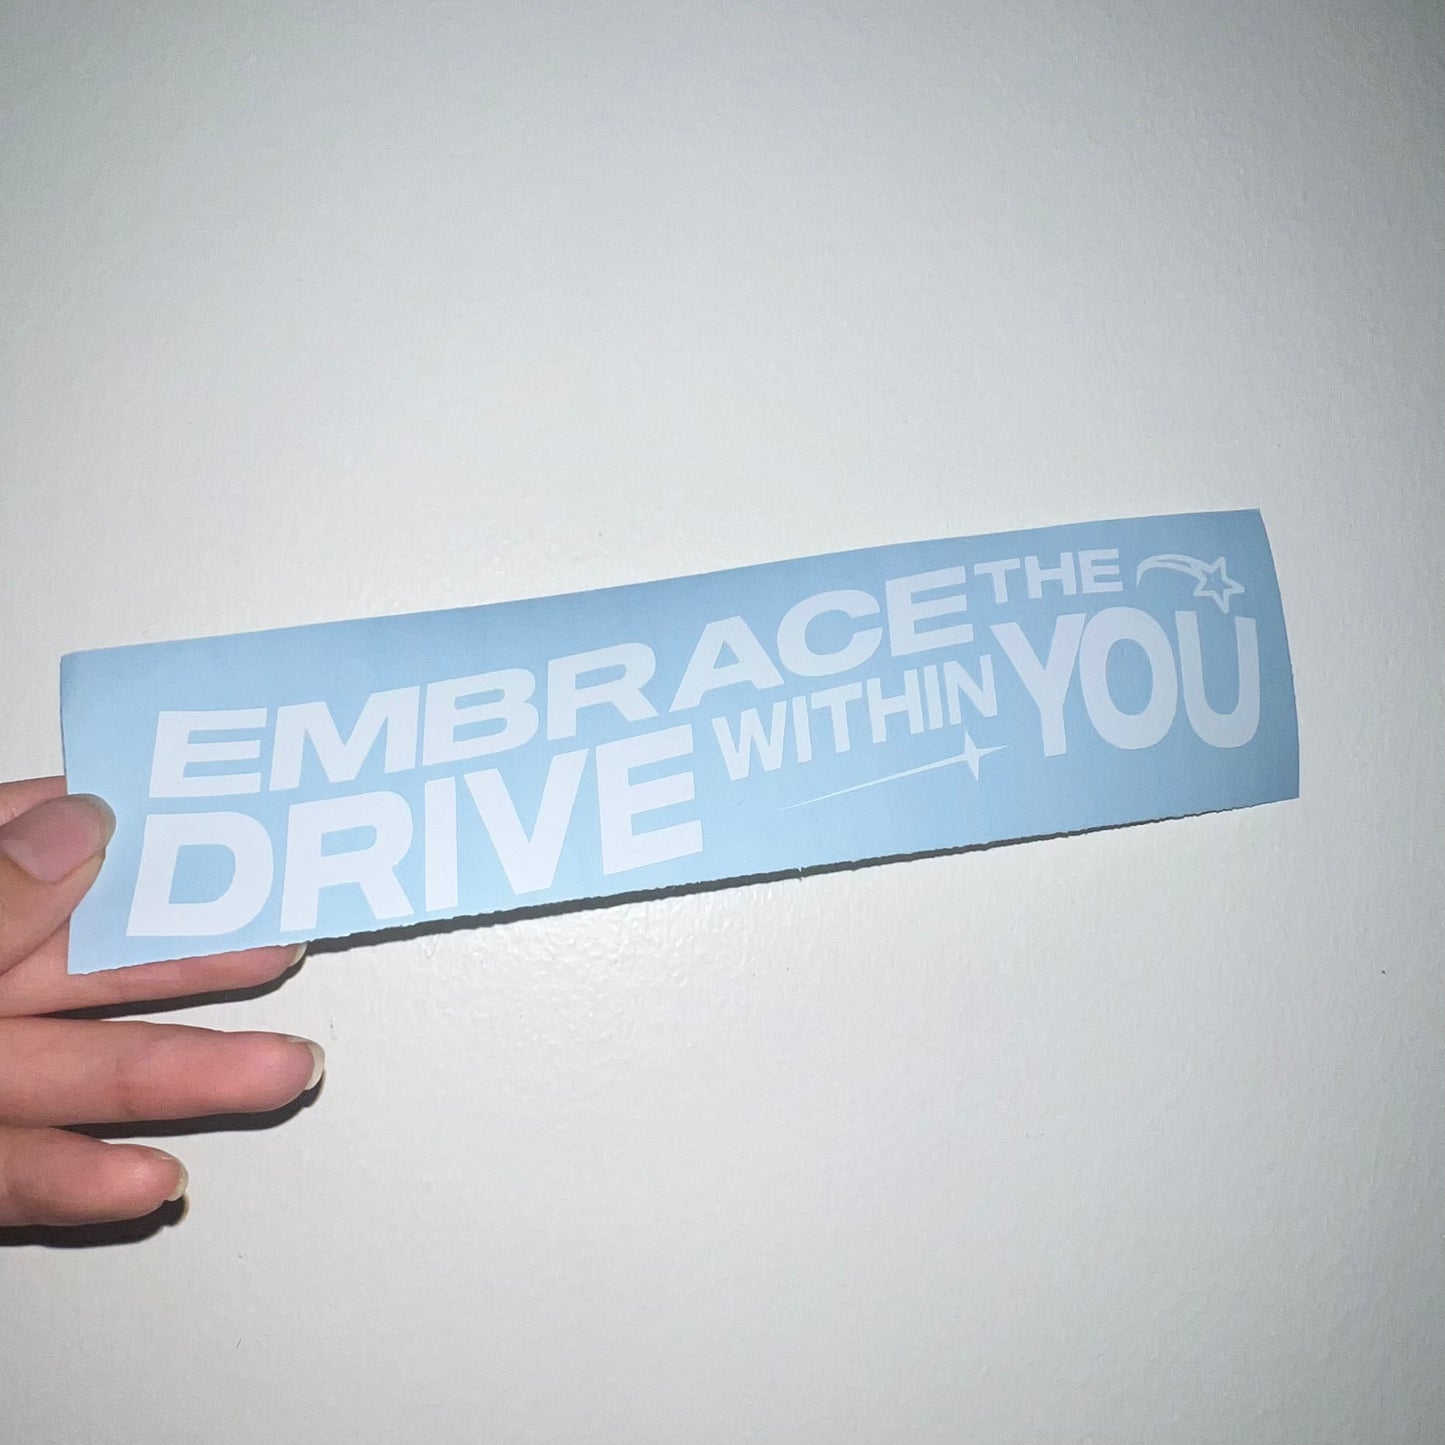 Embrace the Drive Decal